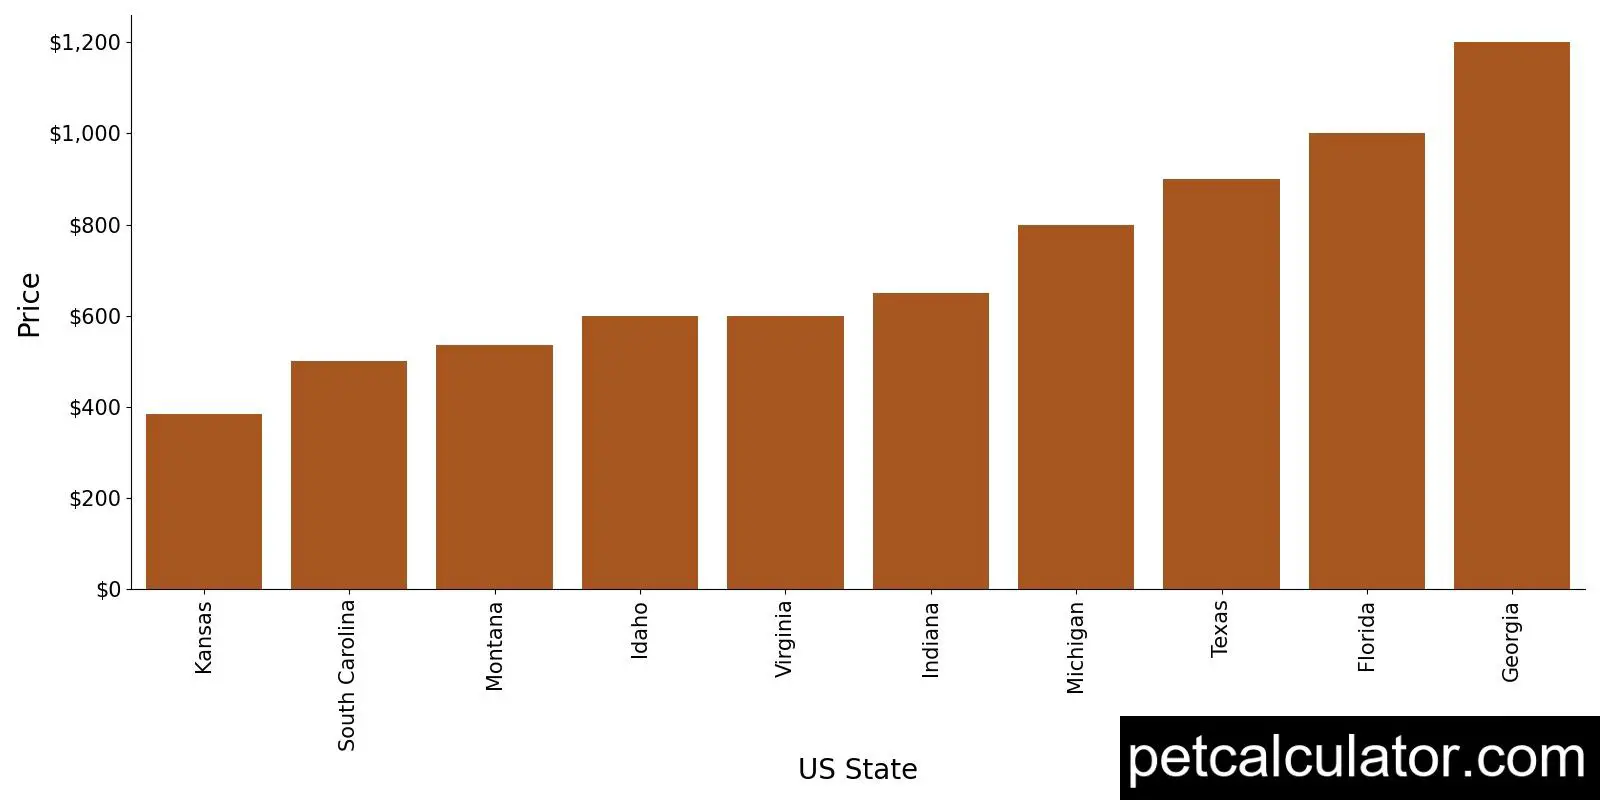 Price of Patterdale Terrier by US State 